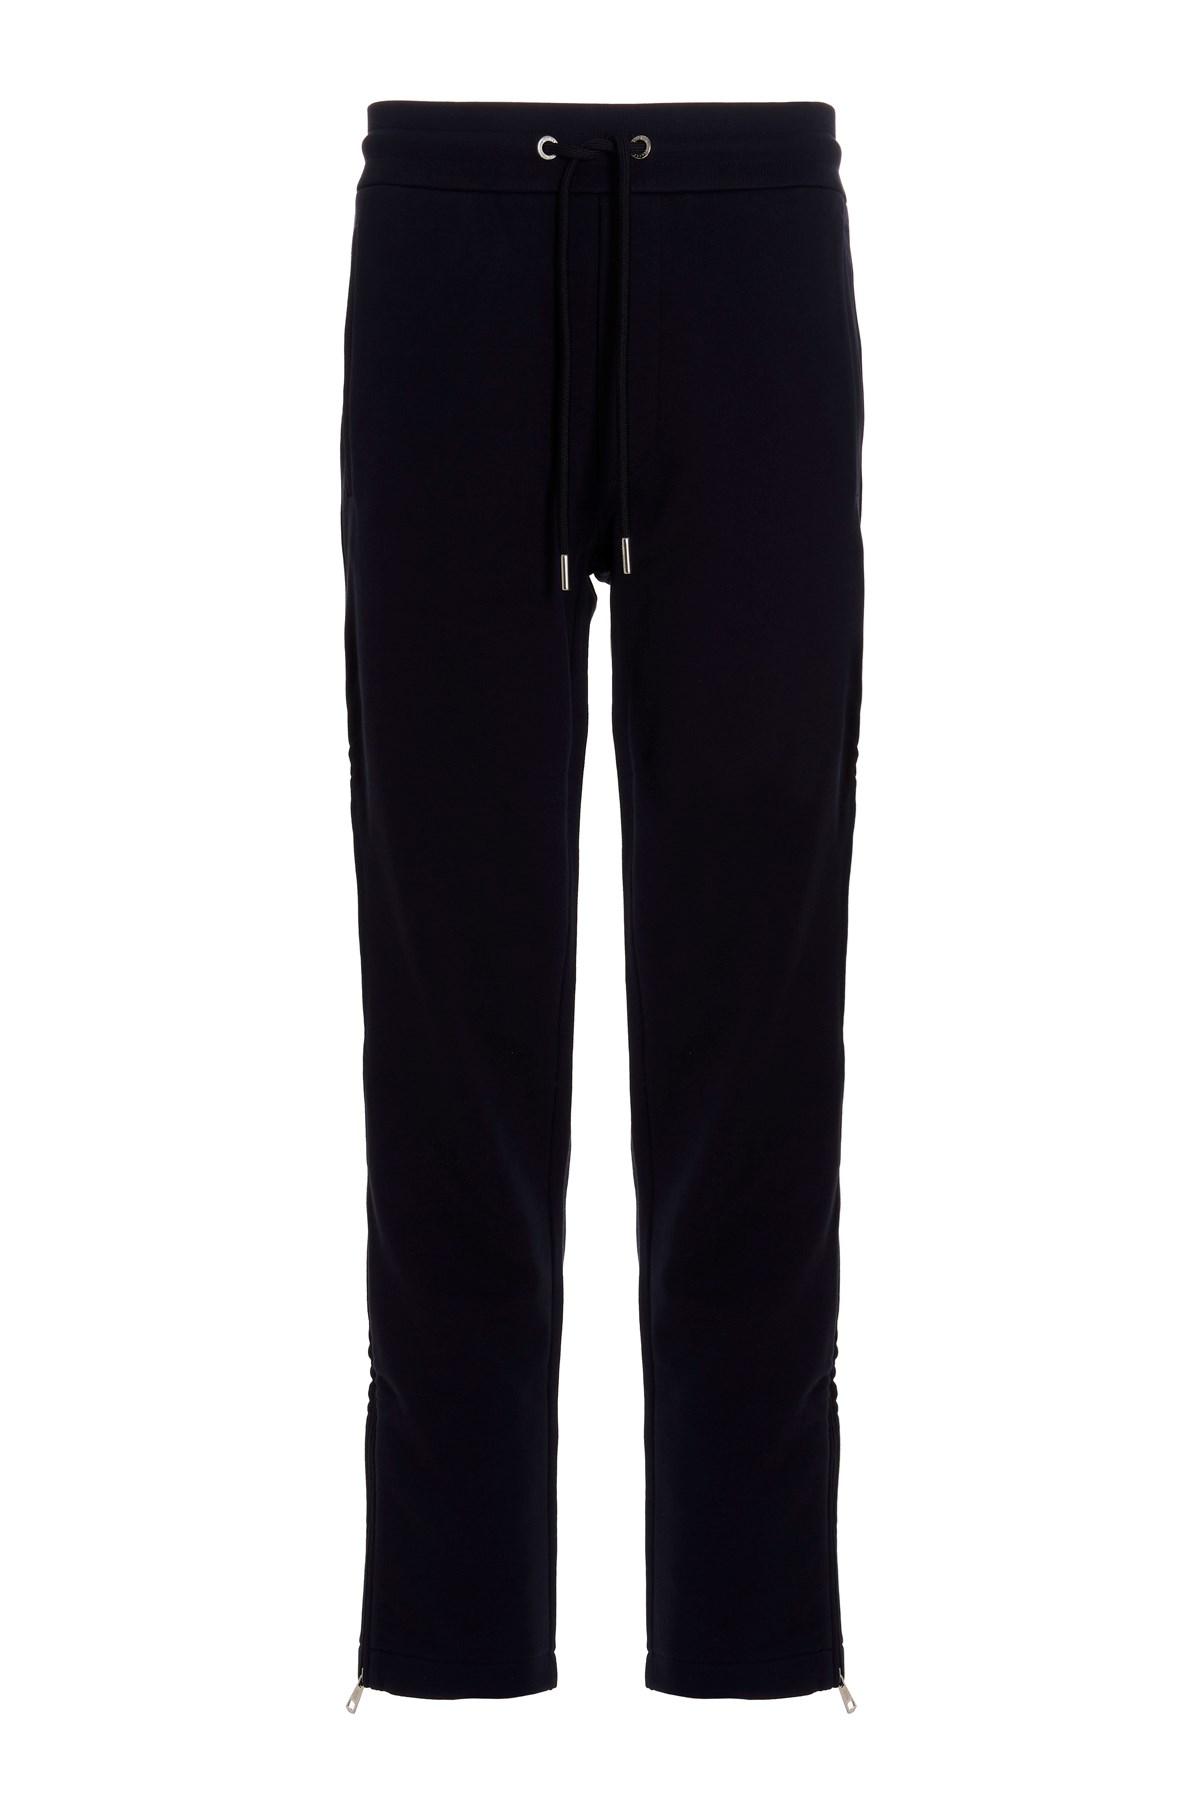 MONCLER Trousers Featuring Splits At The Sides.